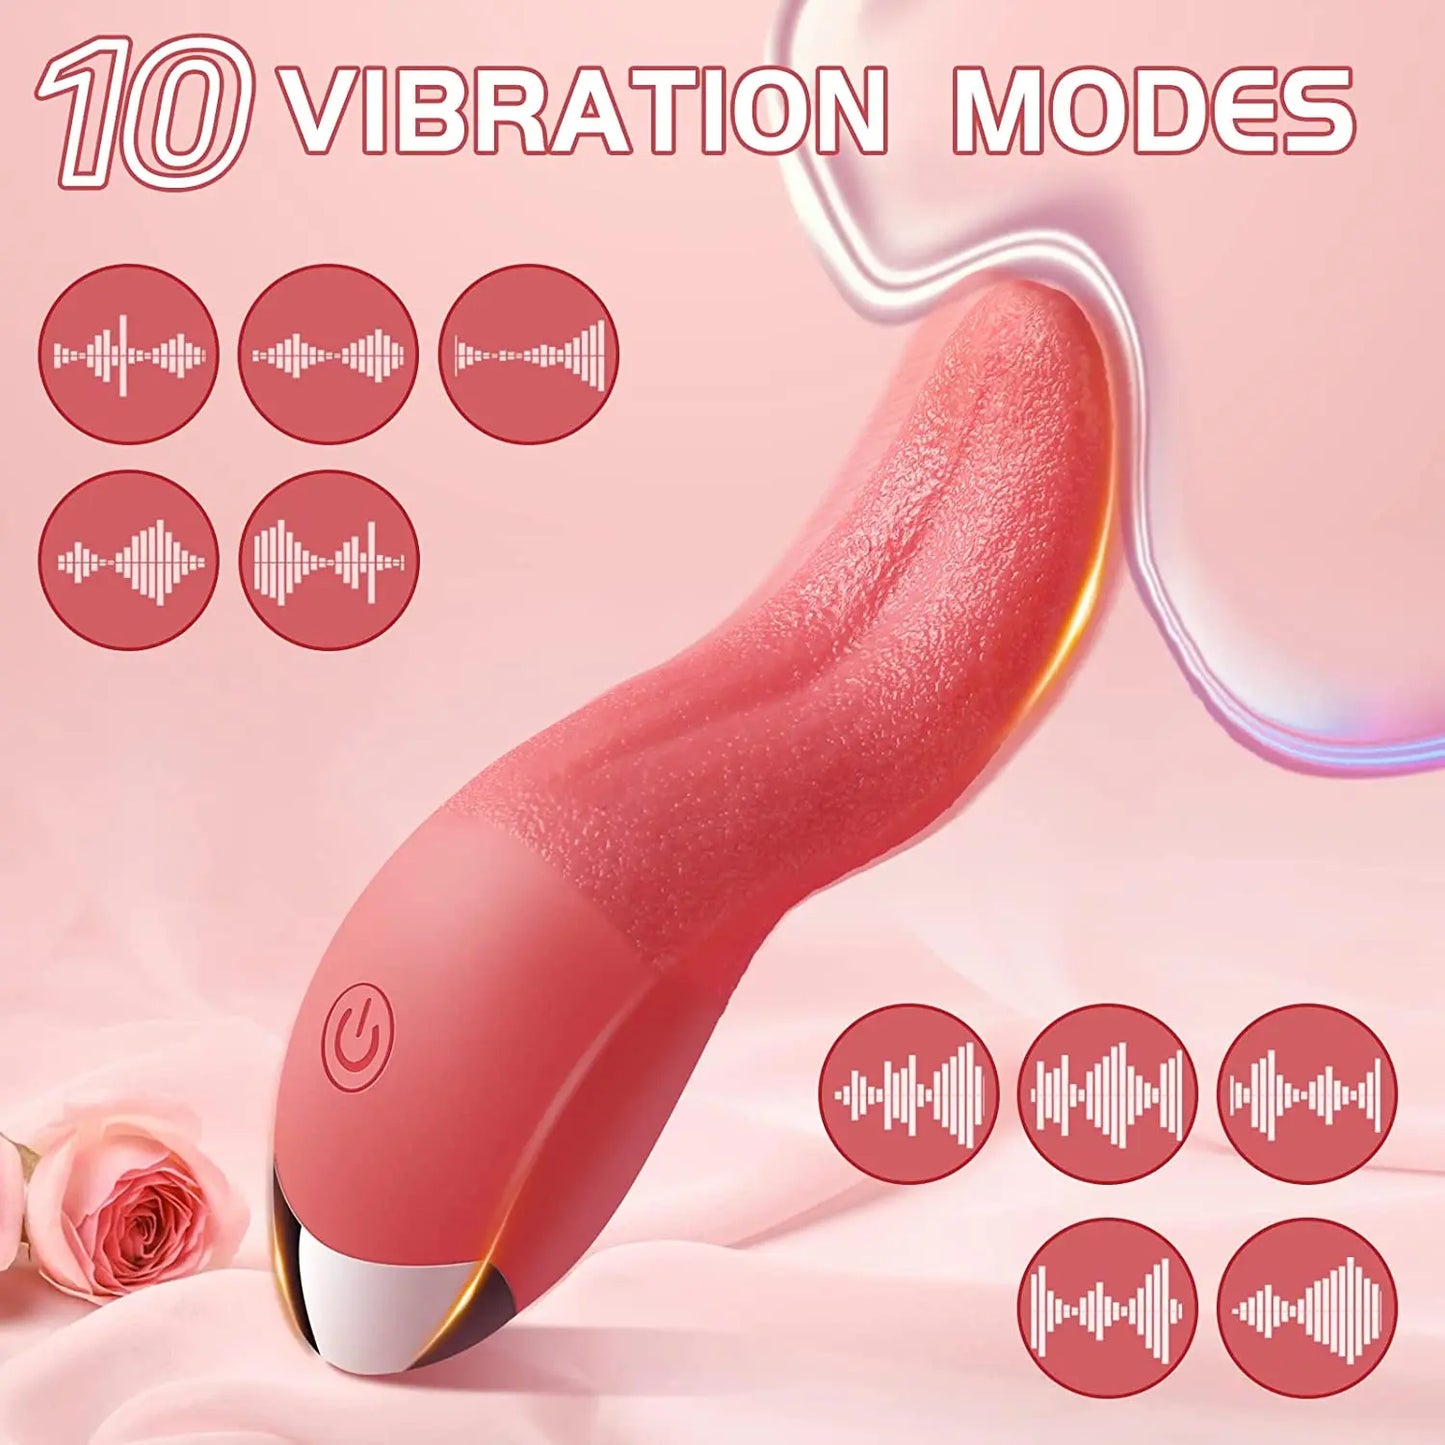 Tongue-in-Chic Vibrator